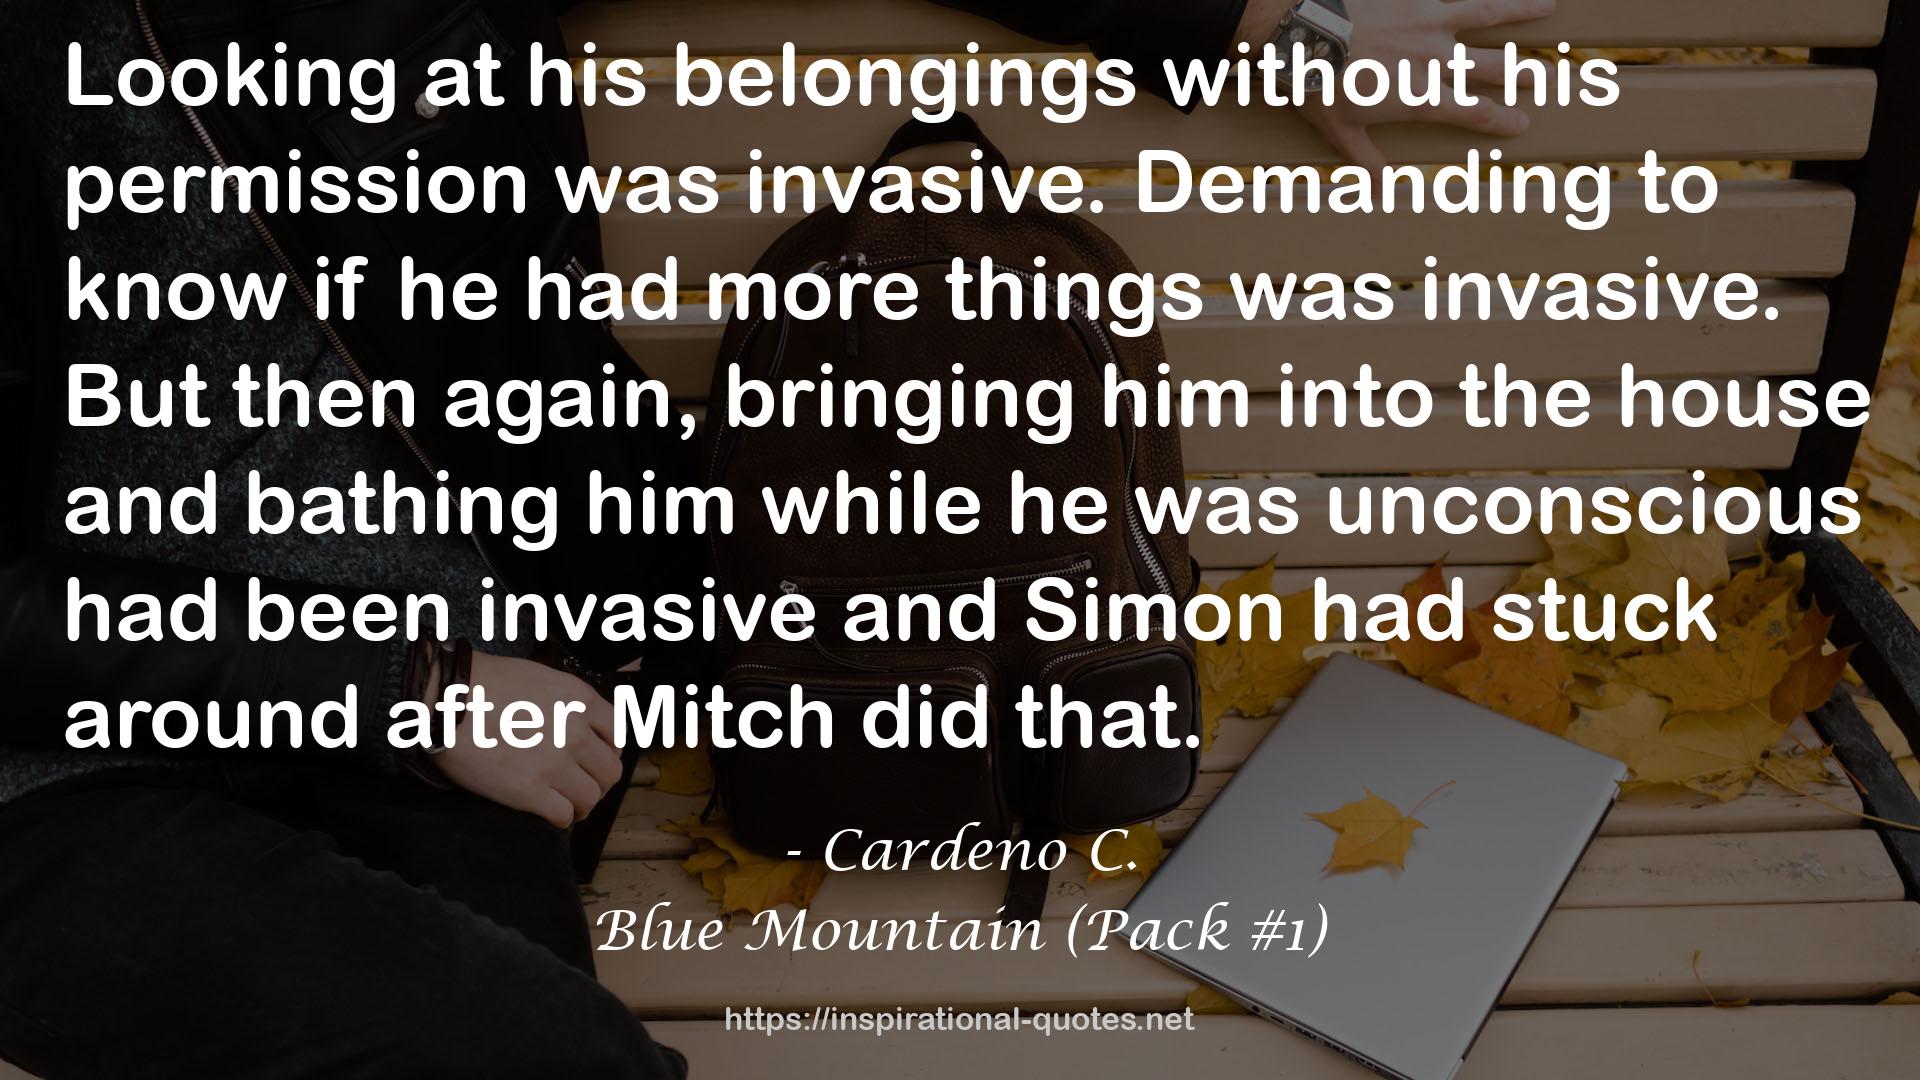 Blue Mountain (Pack #1) QUOTES